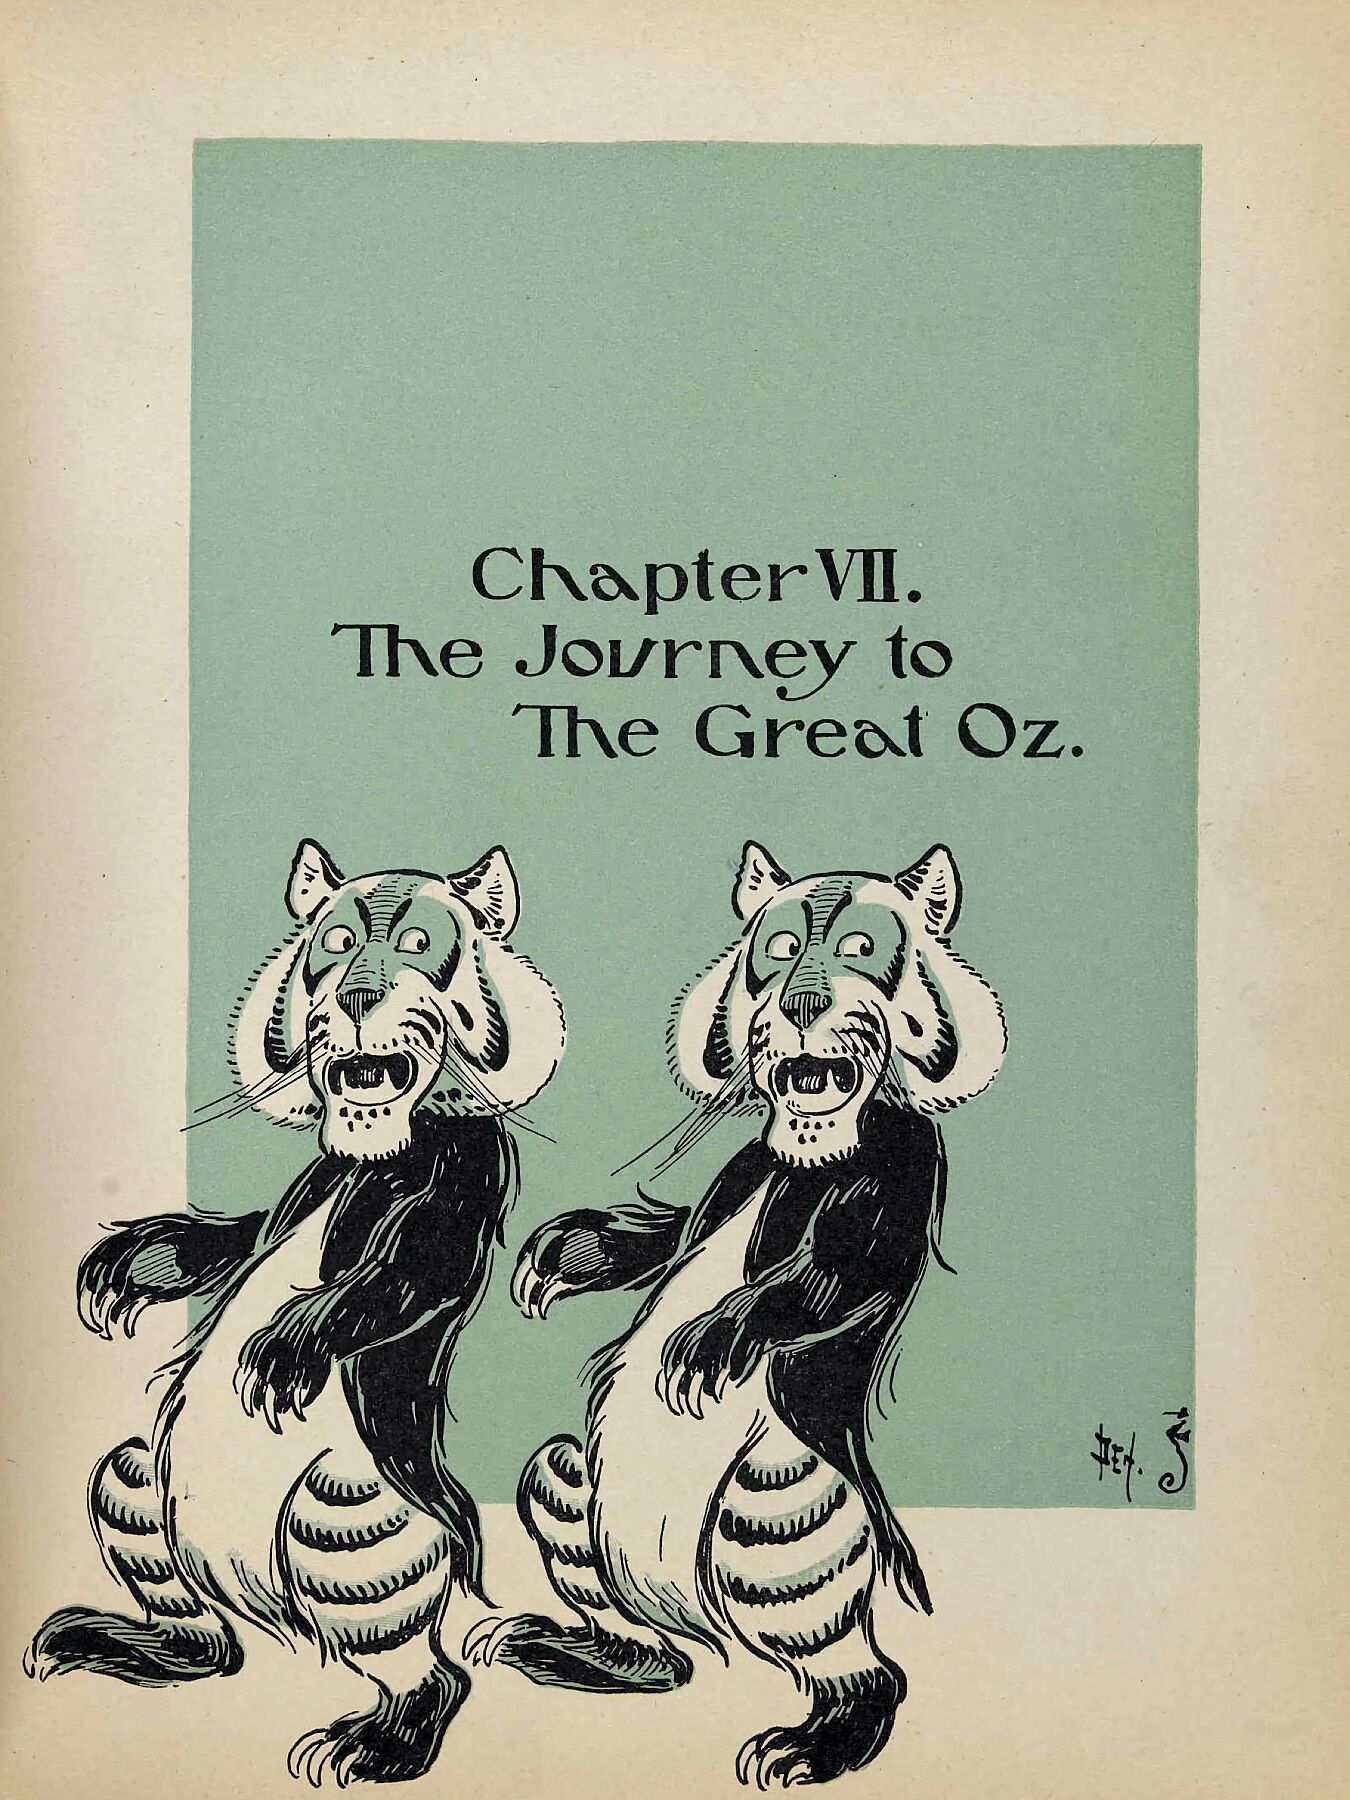 Wizard of Oz Chapter VII the journey to the great Oz by by W. W. Denslow - 1900